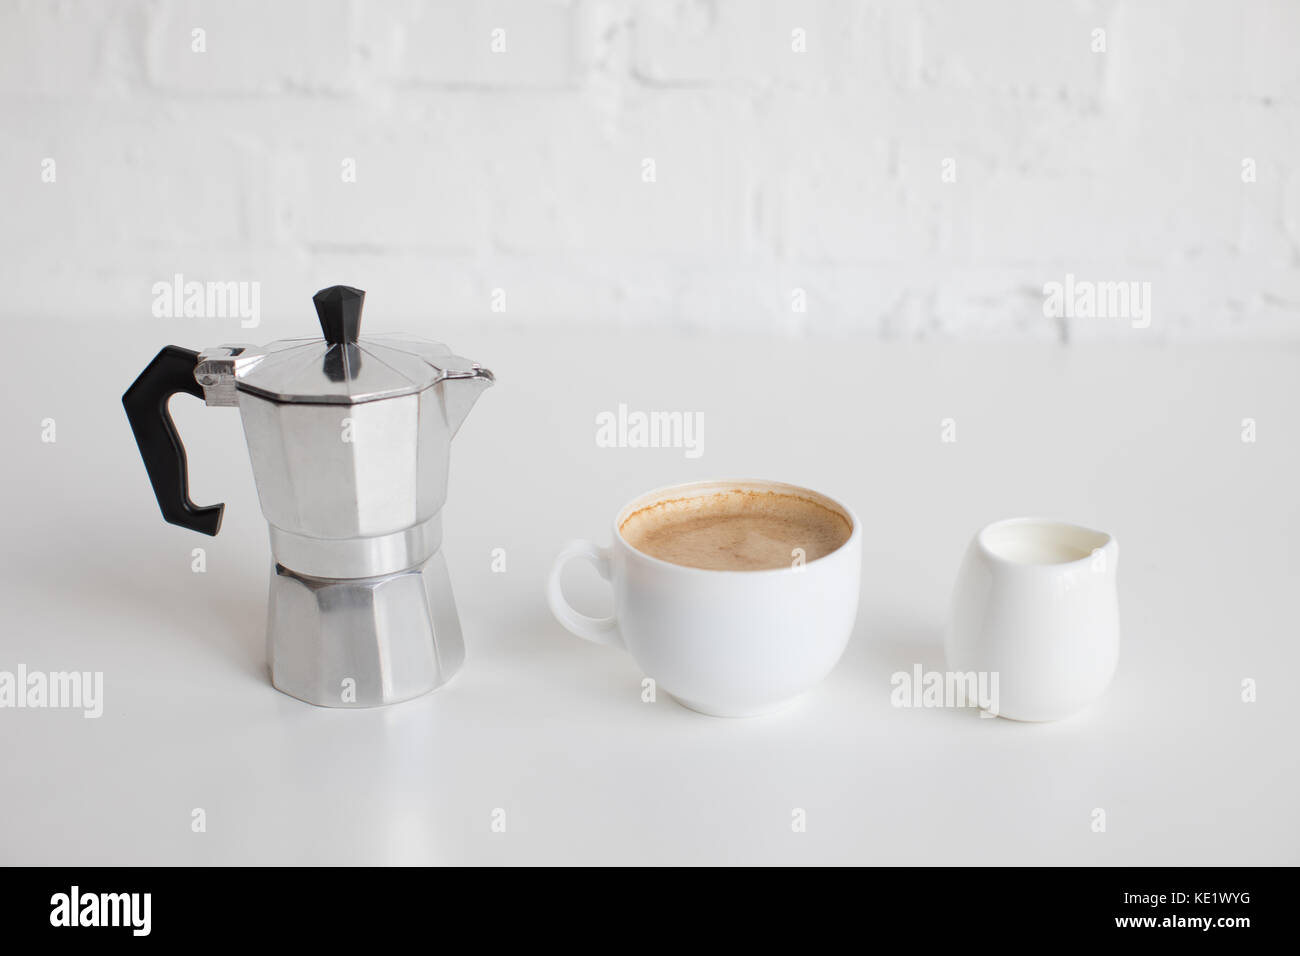 french press, cup of coffee and milk jar standing in row on white table Stock Photo